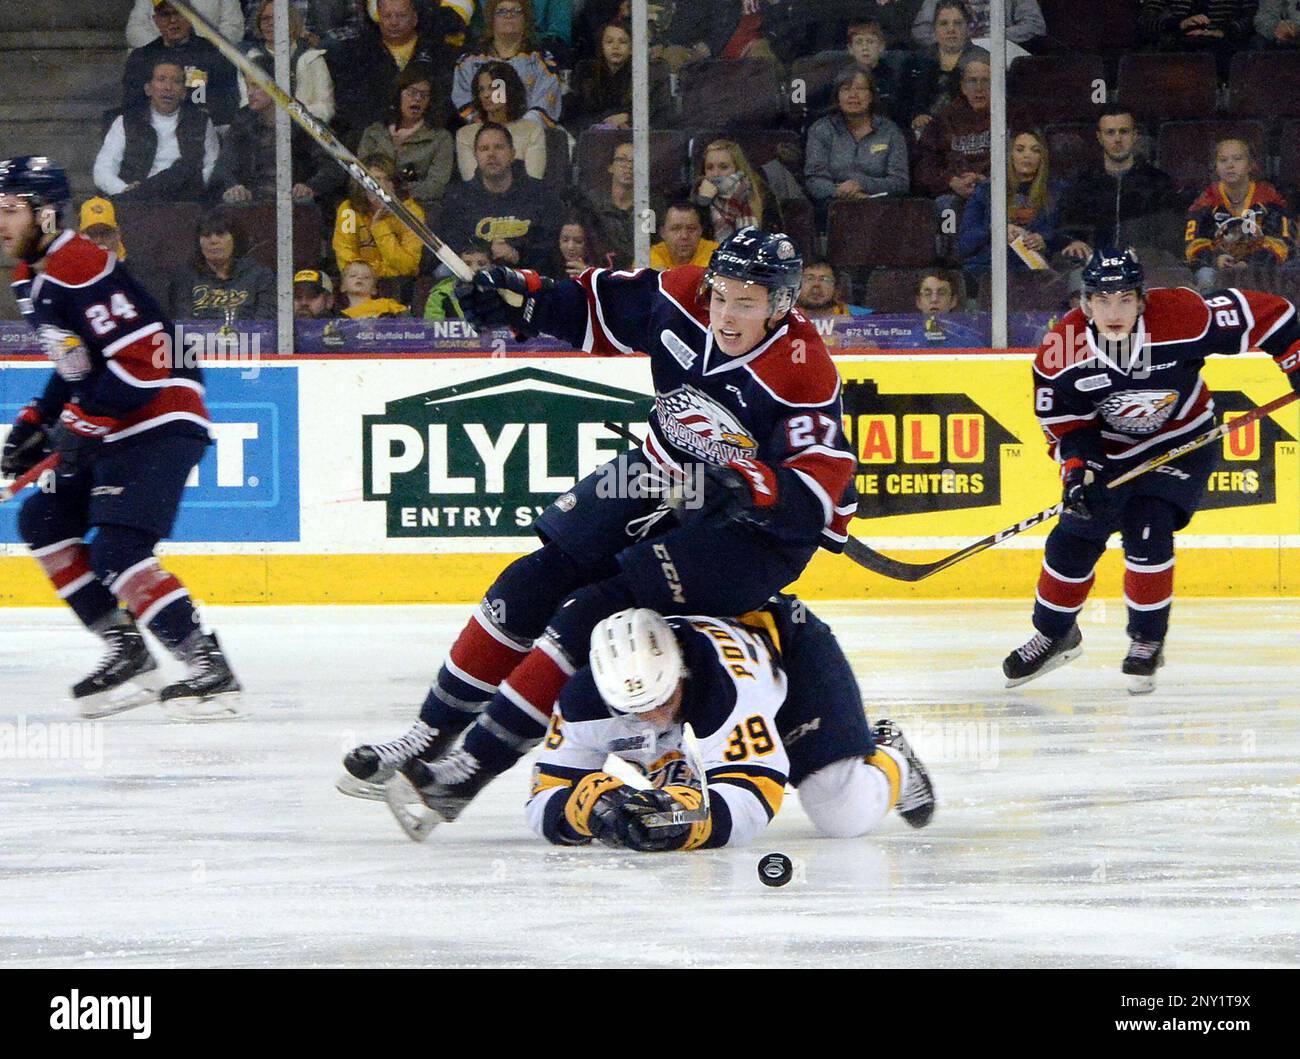 Saginaw Spirit forward Danny Katic, center, falls over Erie Otters forward Gera Poddubnyi during the first period of an OHL hockey game in Erie, Pa., Saturday, Nov